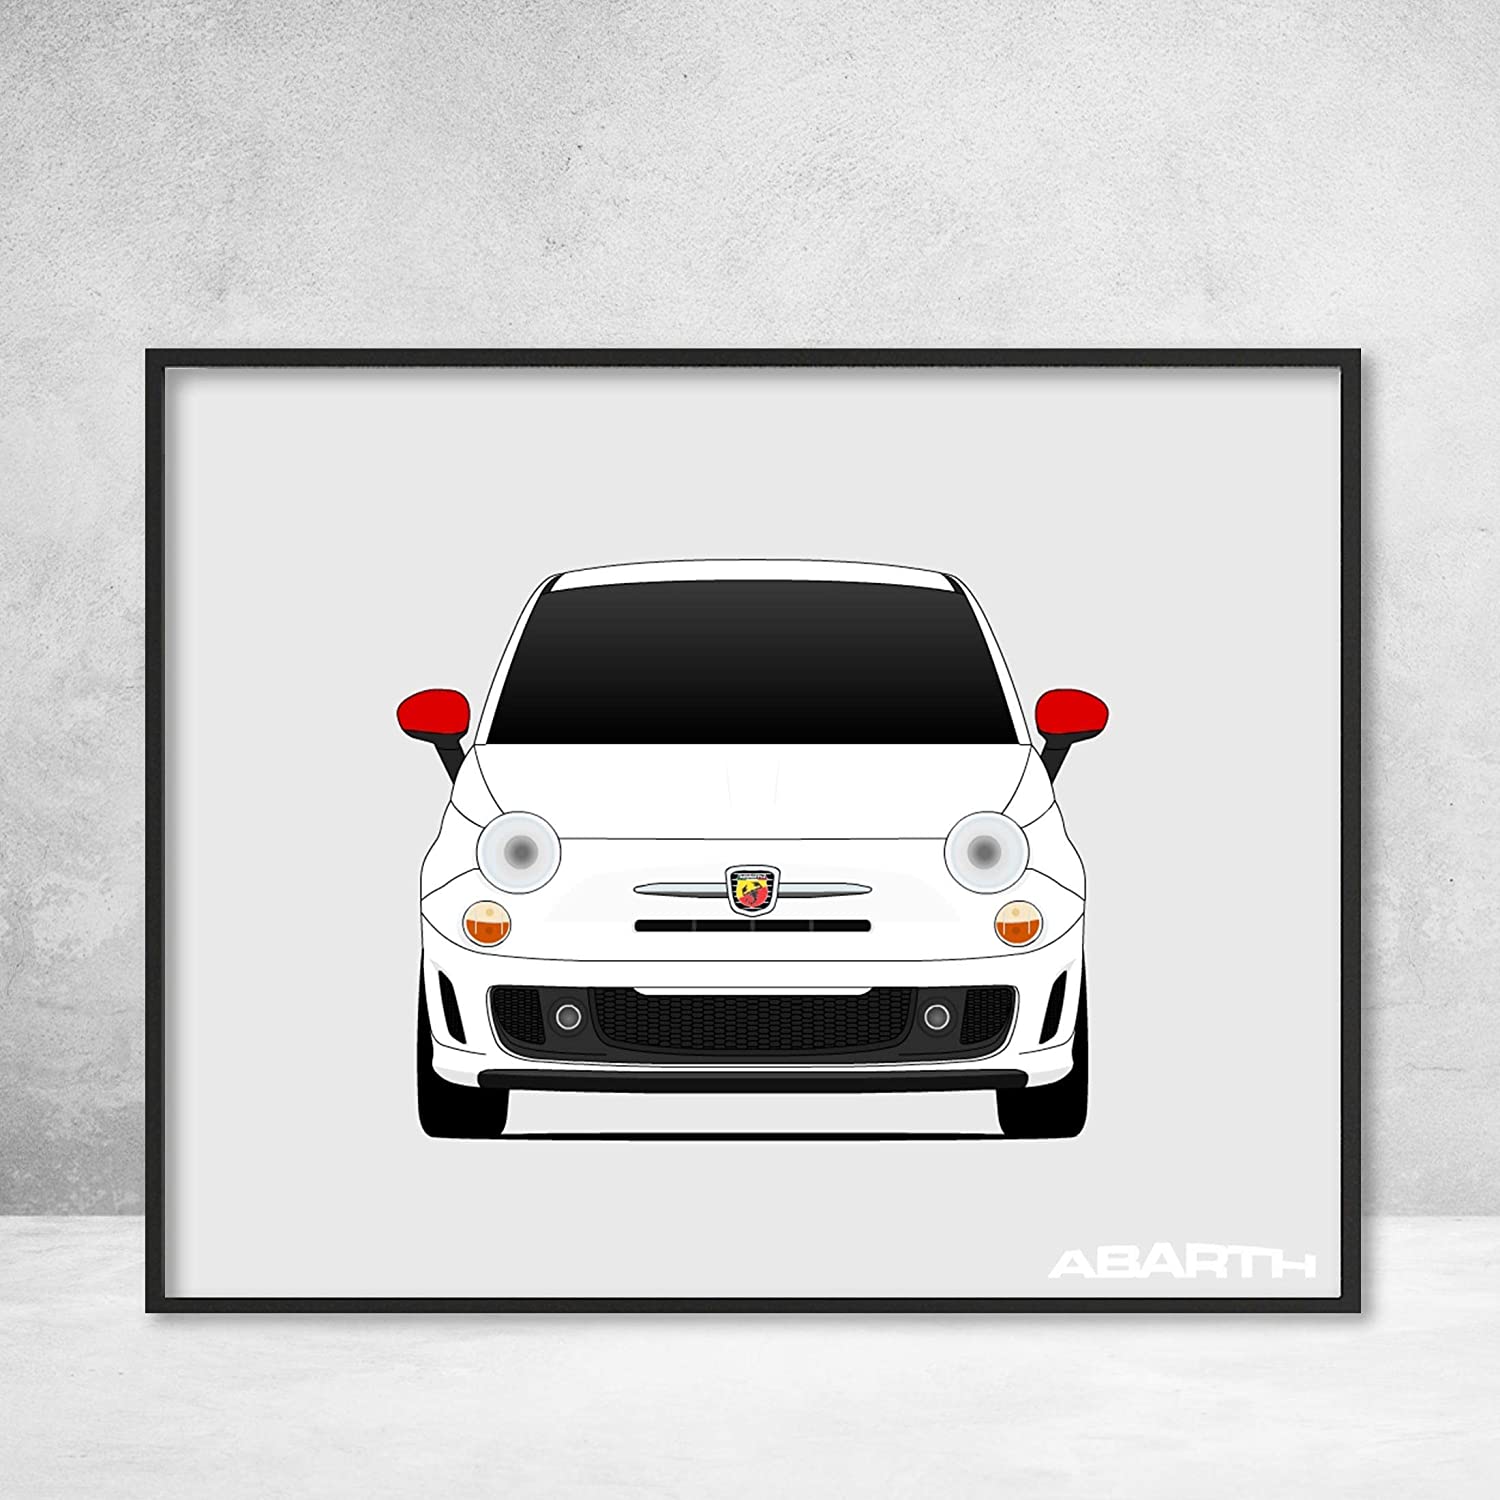 Poster Inspired by Fiat 500 Abarth Poster Print Wall Art Decor